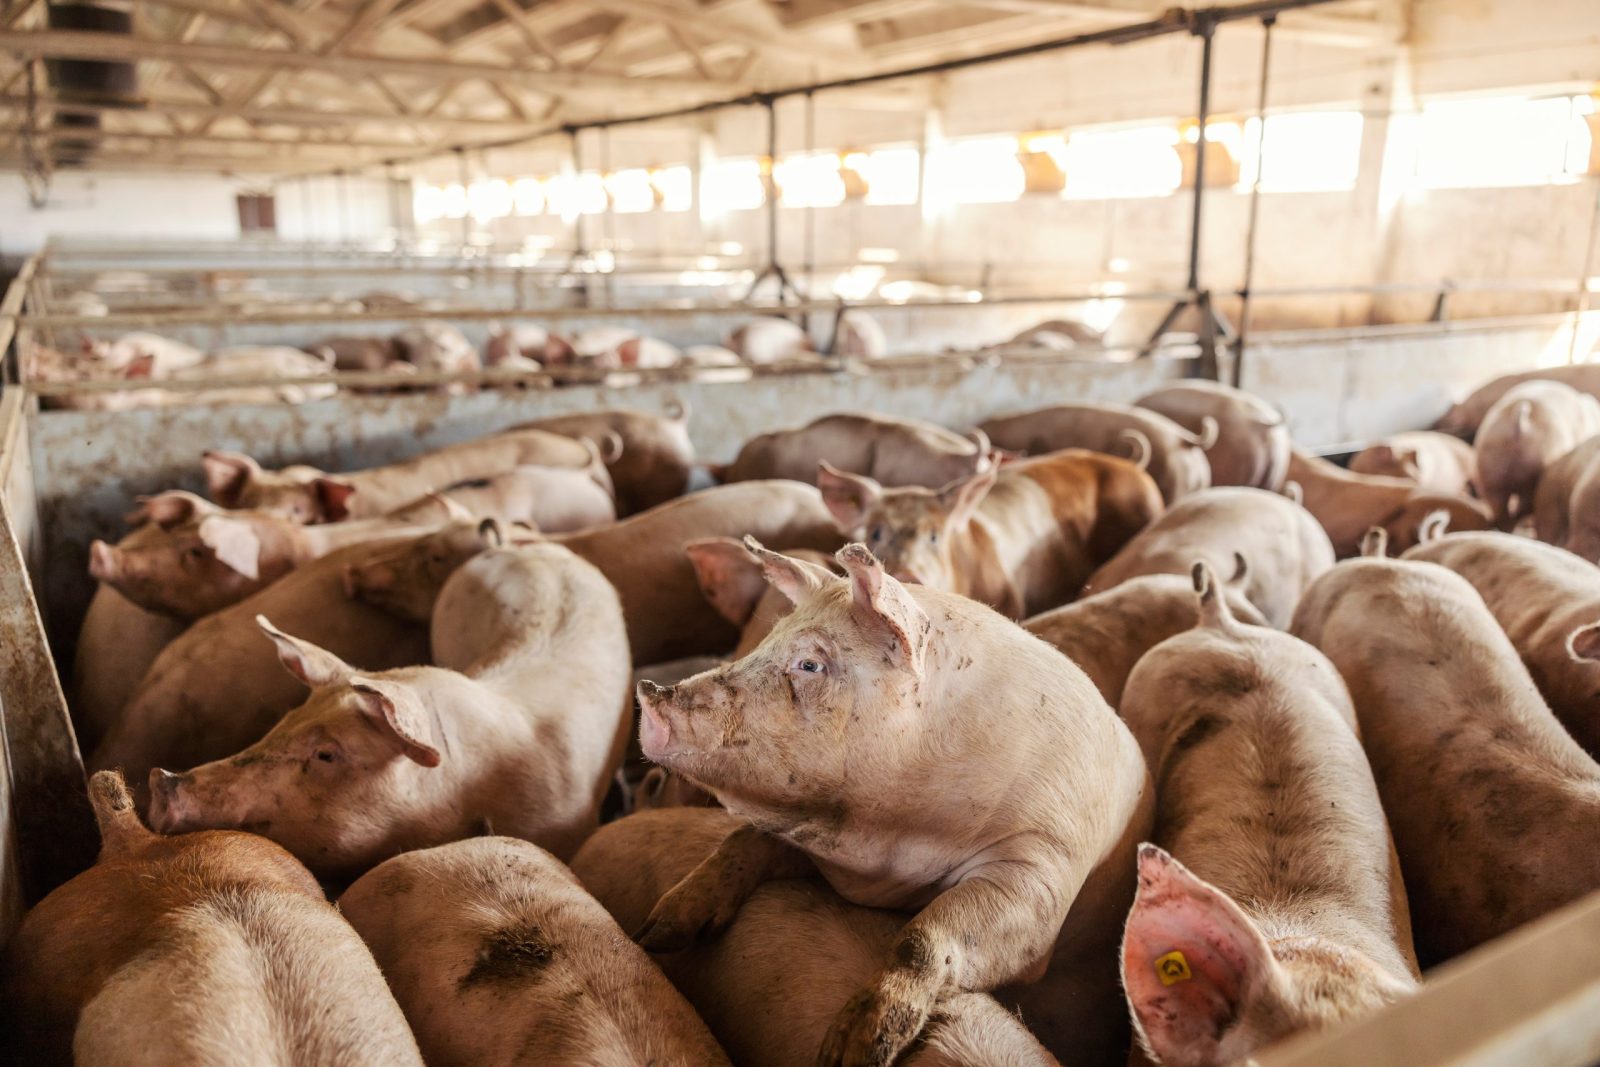 Pigs at a farm packed tightly together